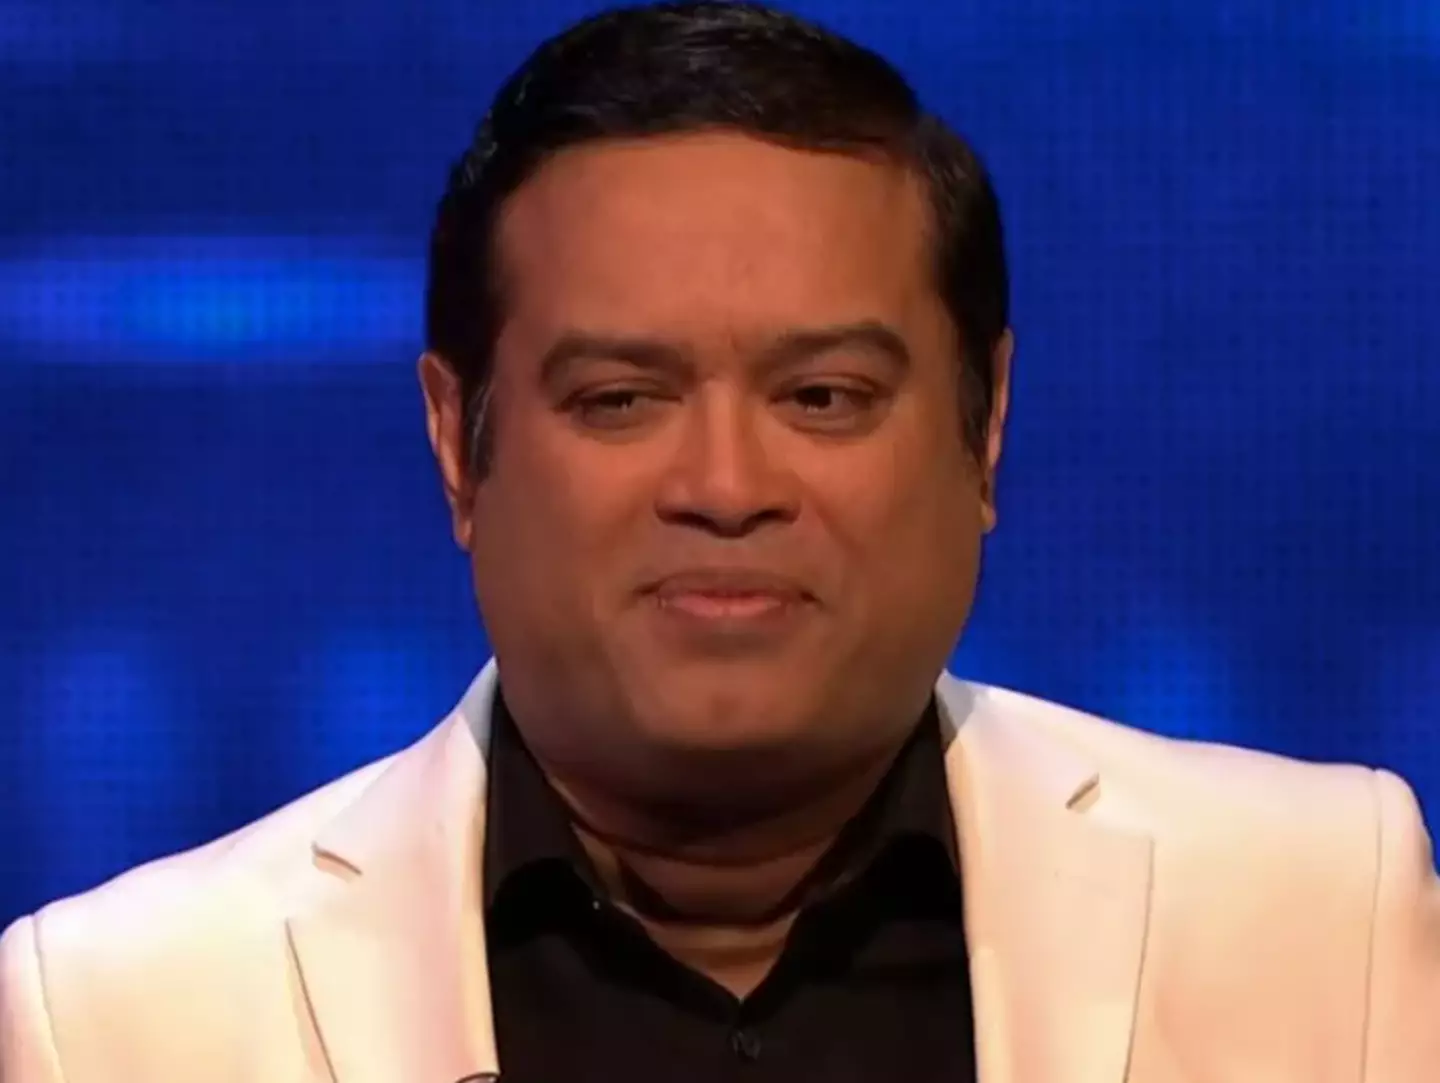 Paul Sinha is best known as one of the 'Chasers'.